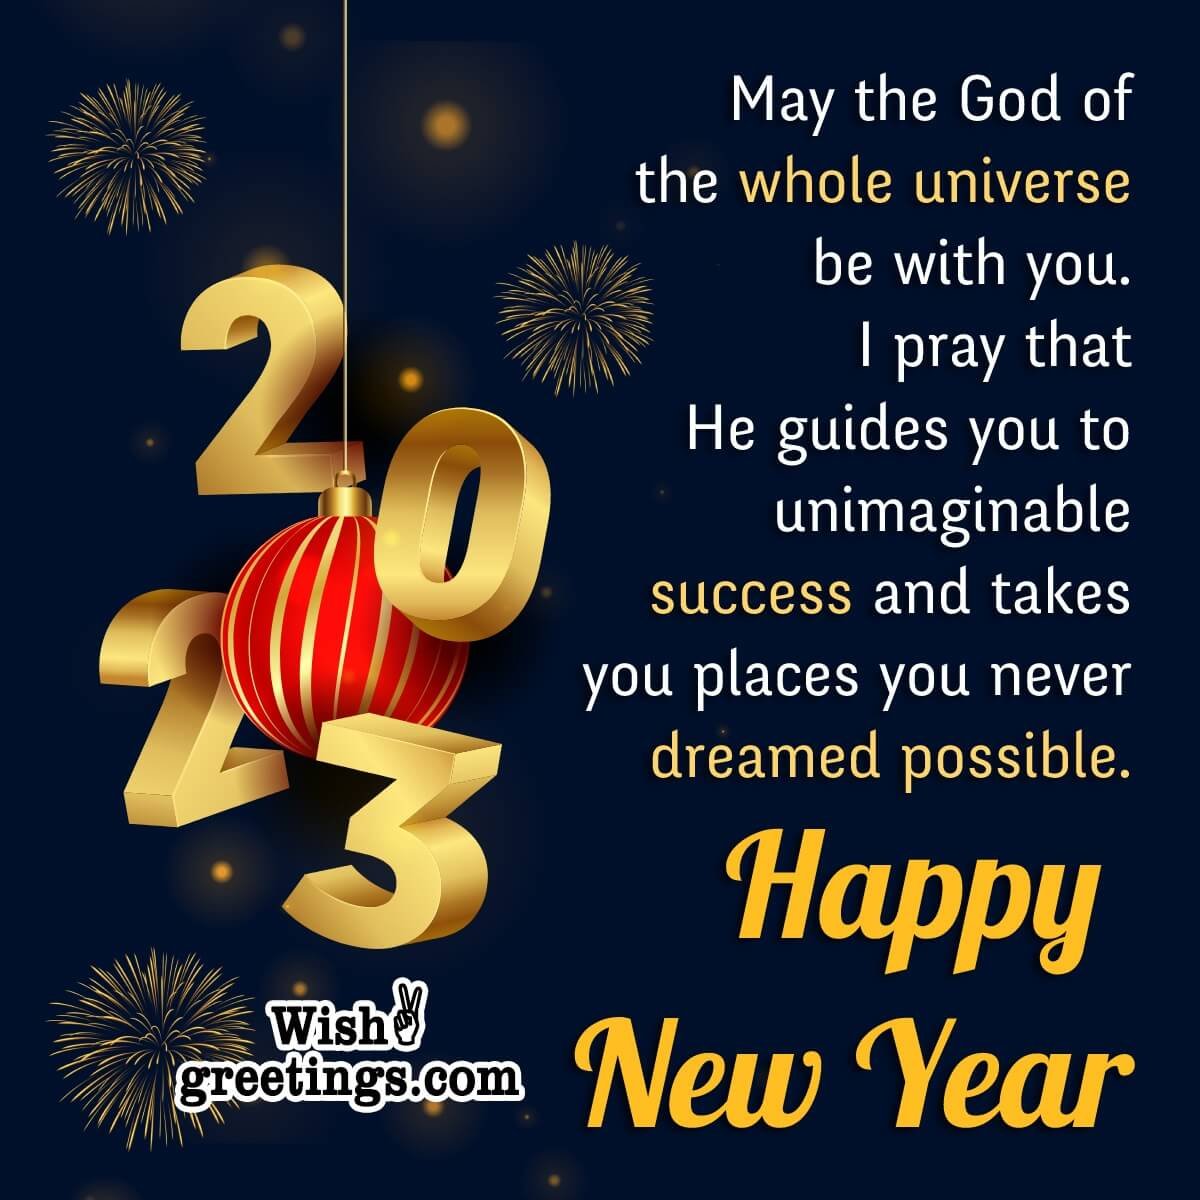 Religious New Year Wishes - Wish Greetings